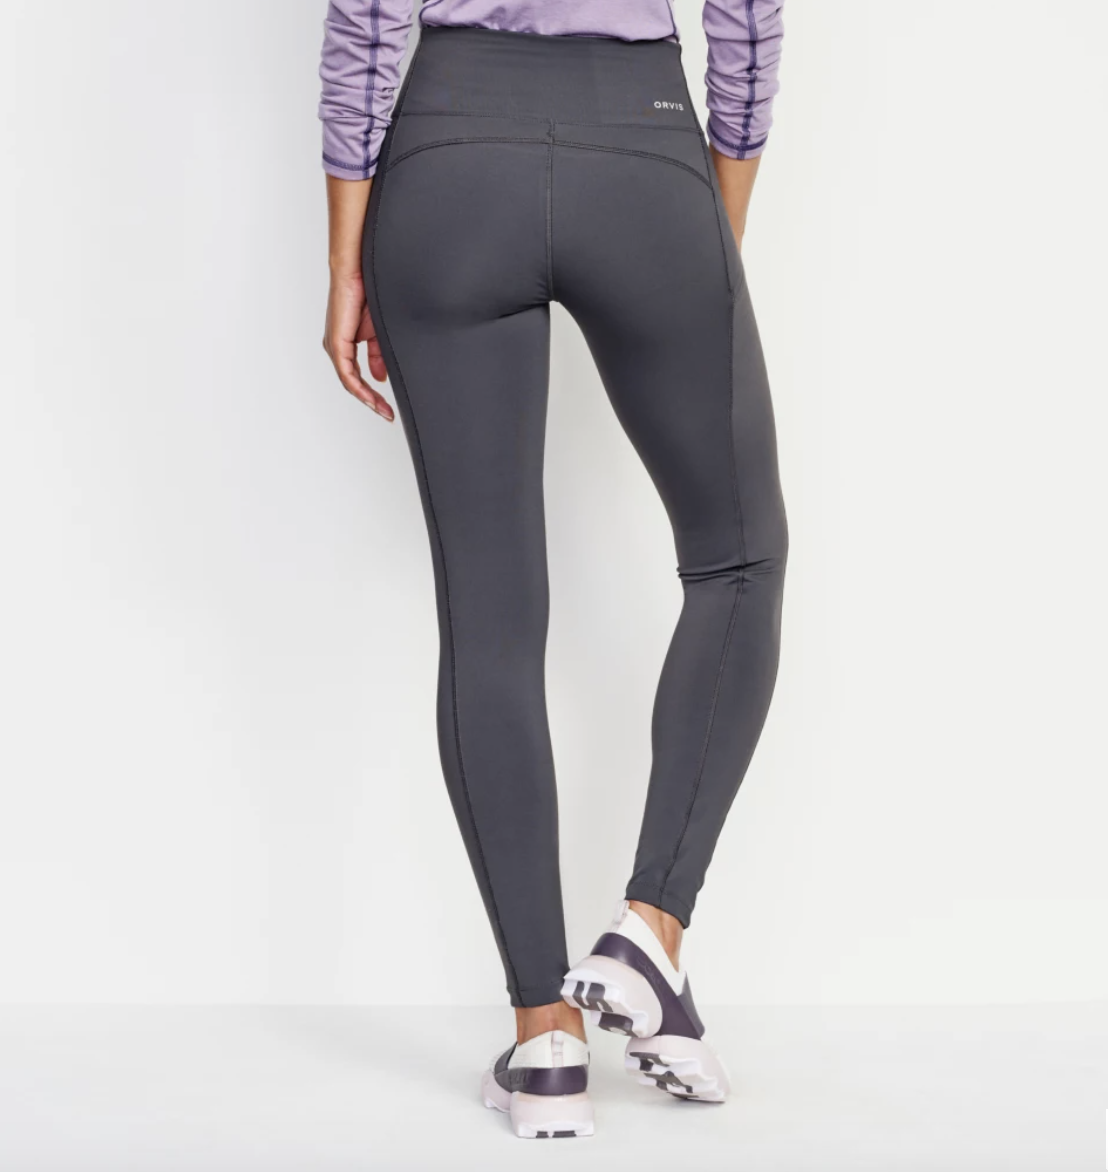 Orvis Orvis Zero Limits Fitted Legging